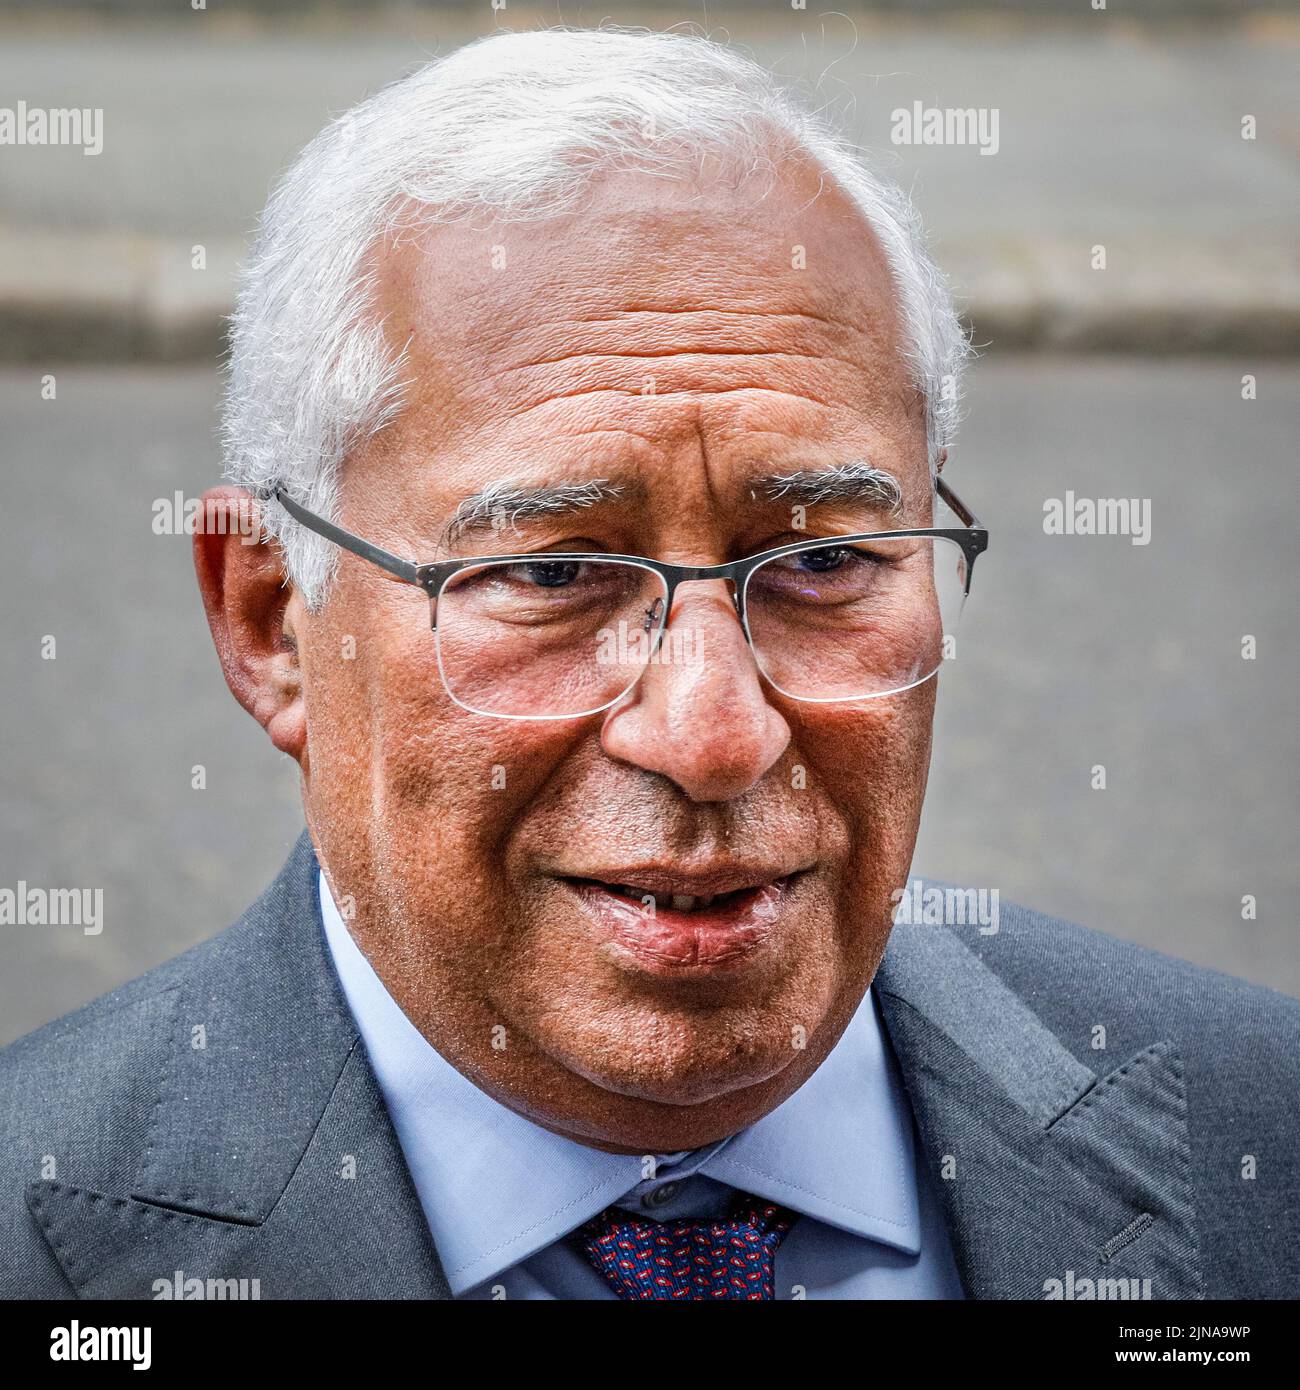 António Costa, Prime Minister of Portugal, official visit to London, close up of face Stock Photo